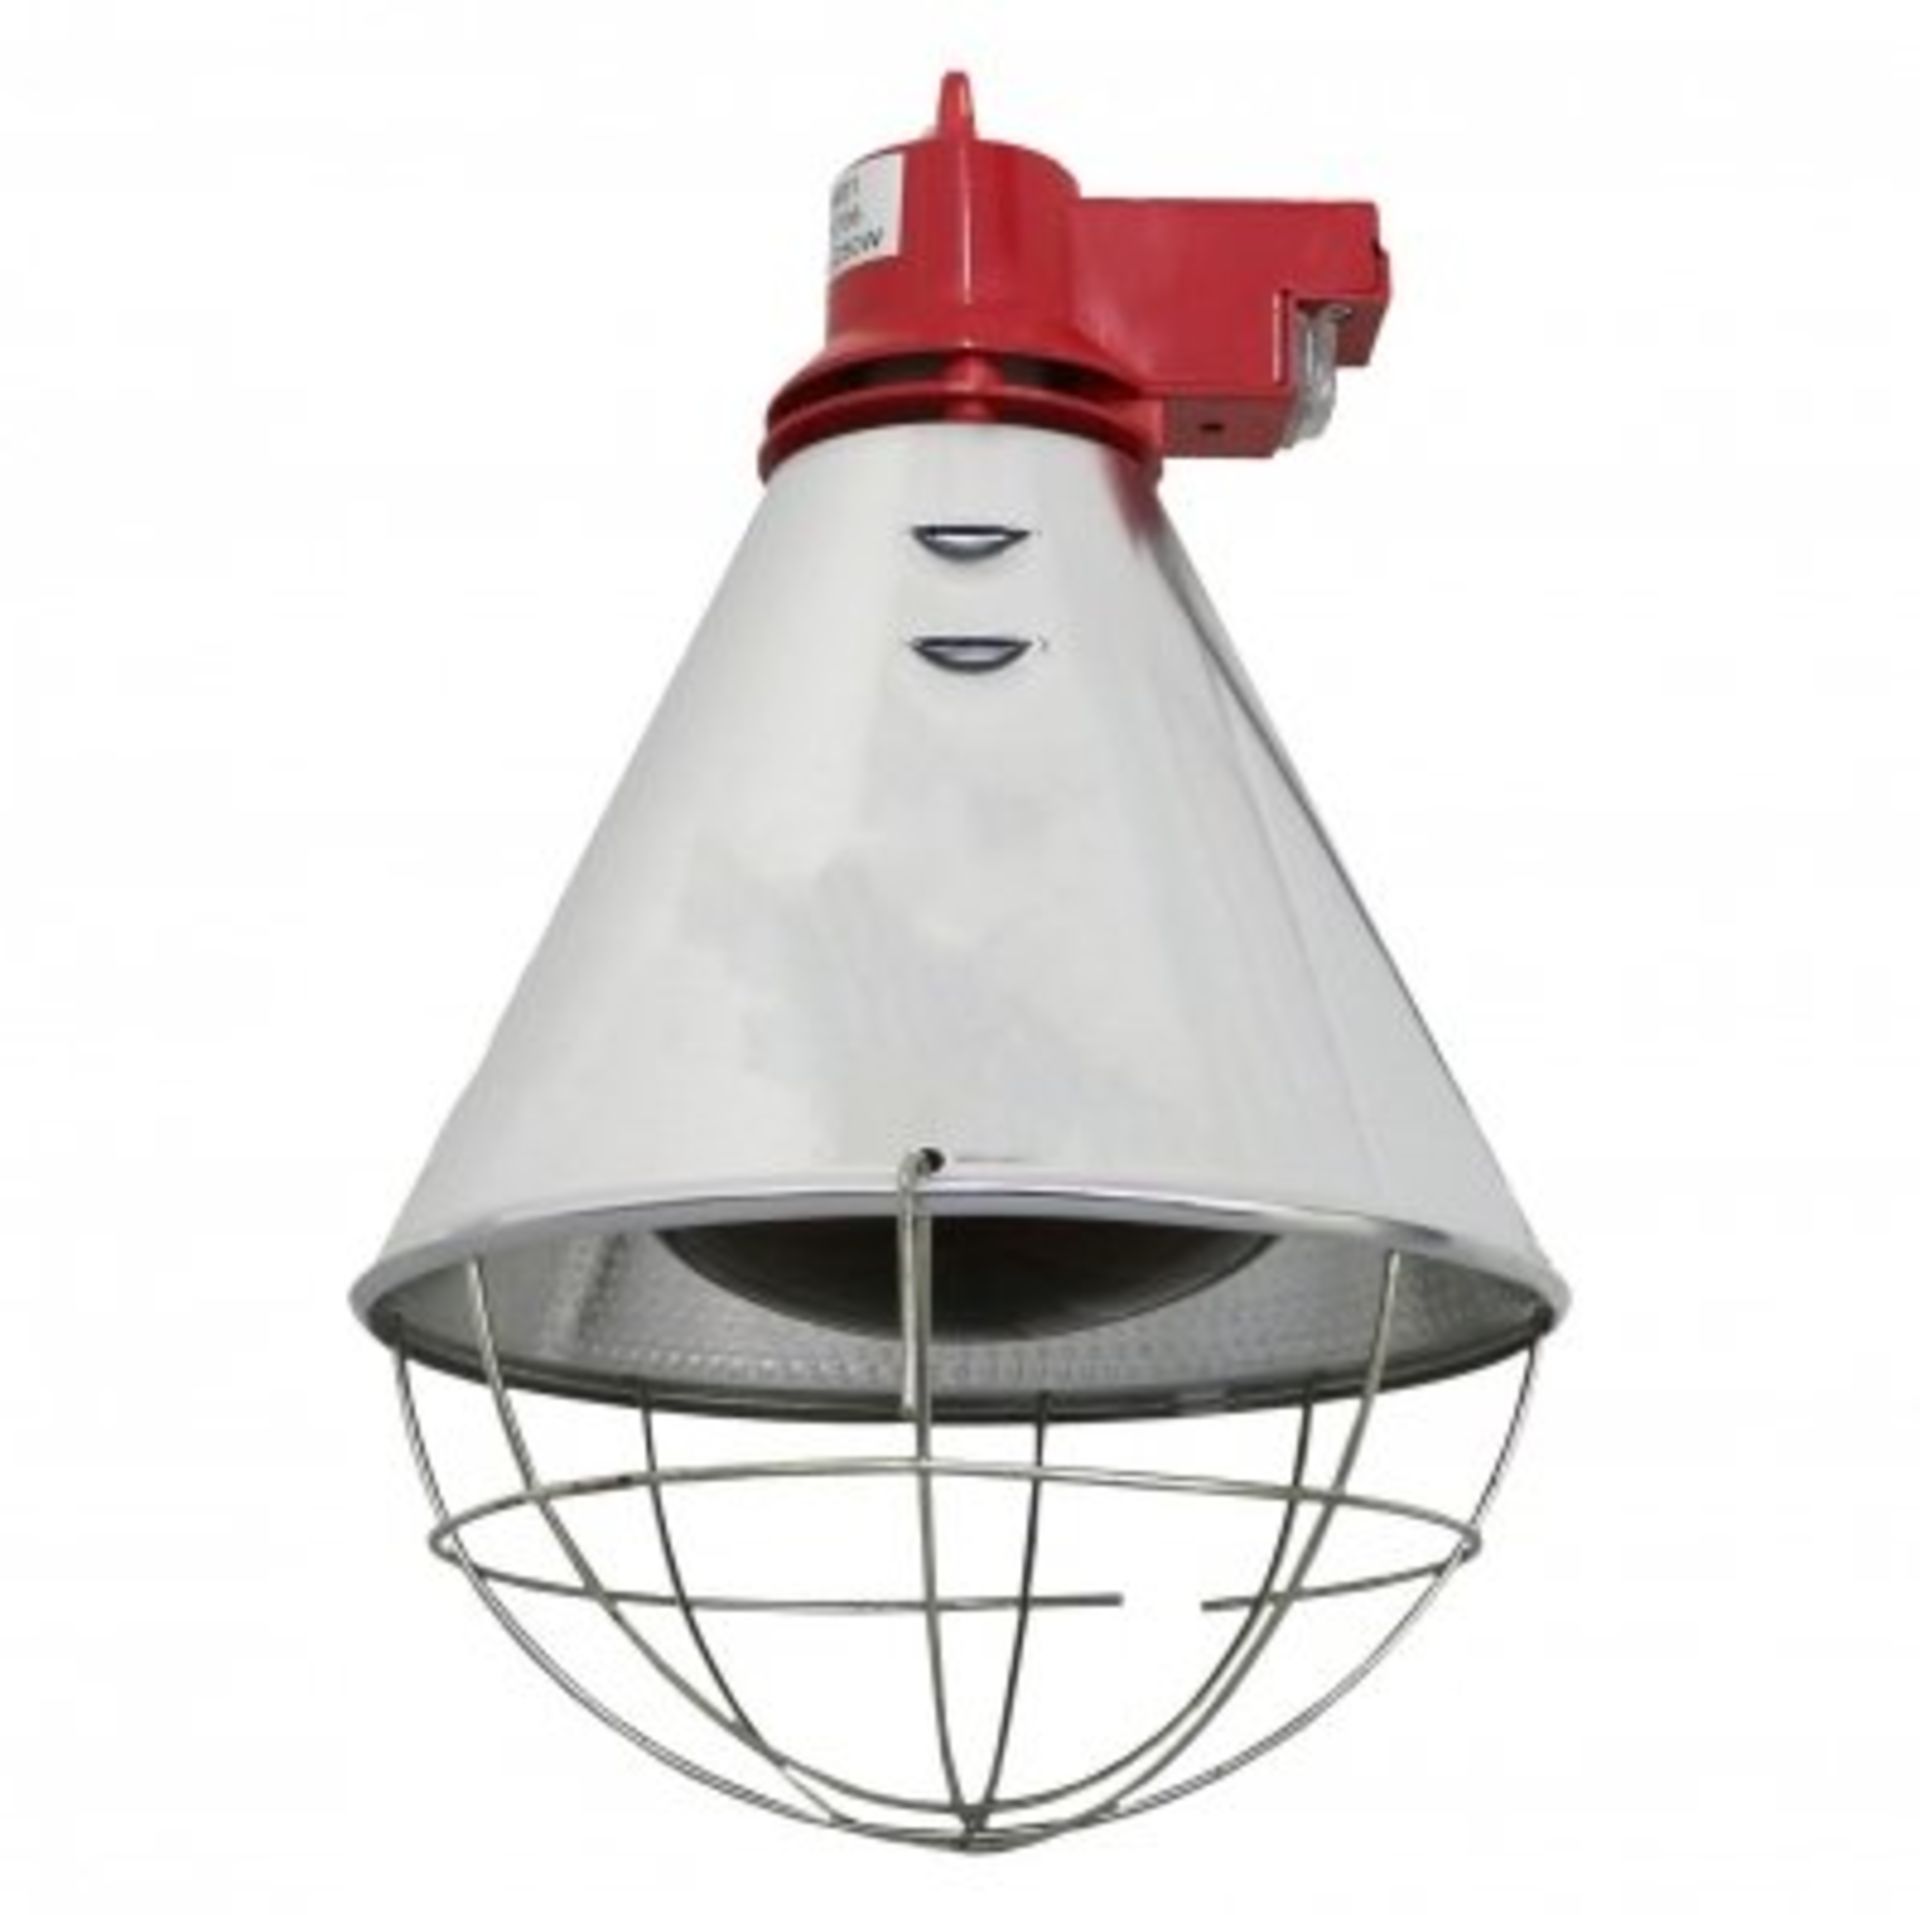 (KK176) Poultry Heat Incubator Lamp 250W c/w Red Bulb Perfect for birds, ducks, hens, chicke...